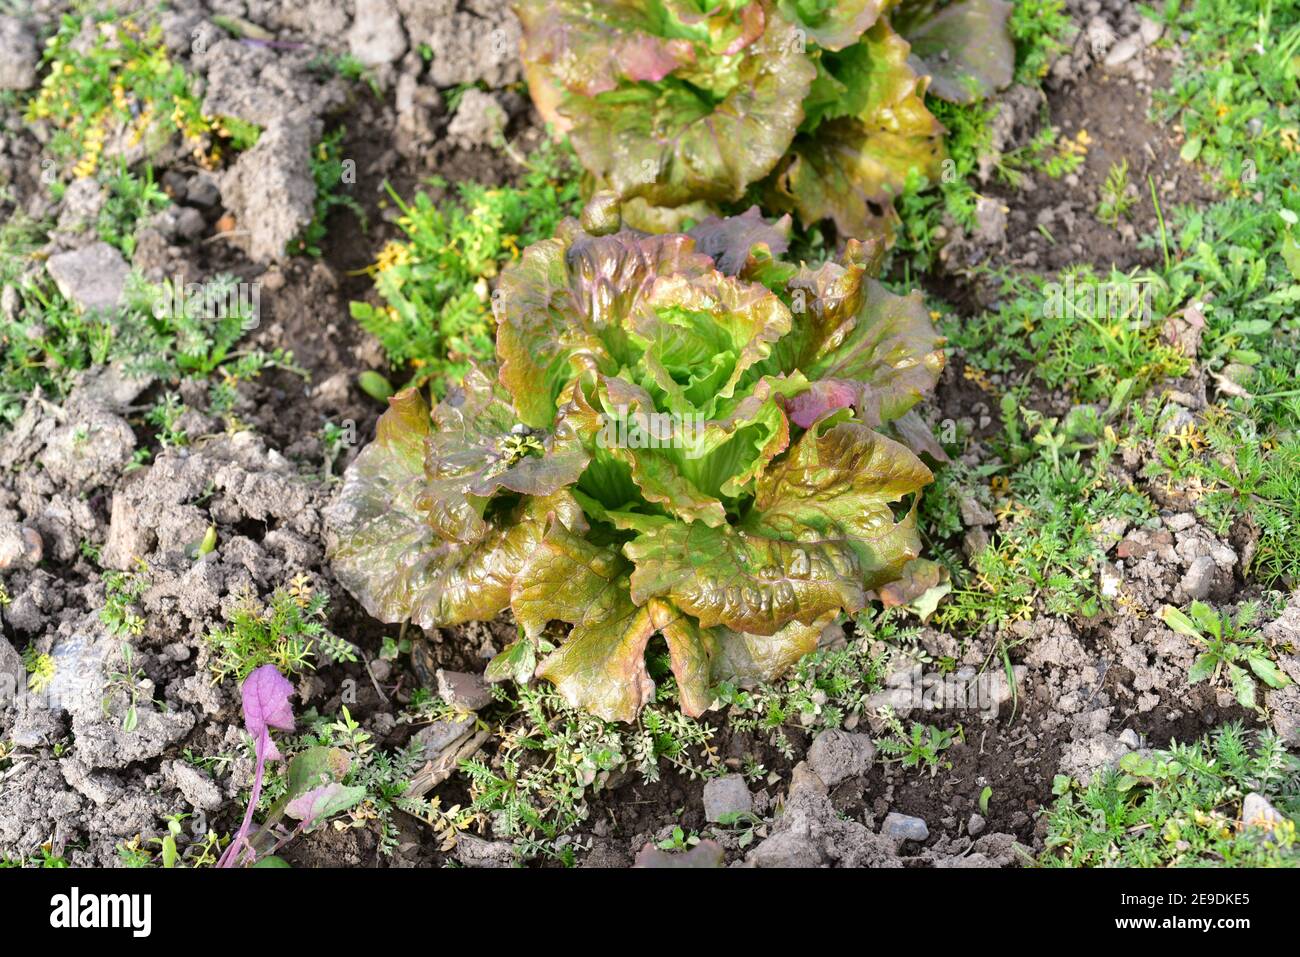 Lettuce (Lactuca sativa) is an annual plant edible. This photo was taken in Baix Llobregat, Barcelona province, Catalonia, Spain. Stock Photo